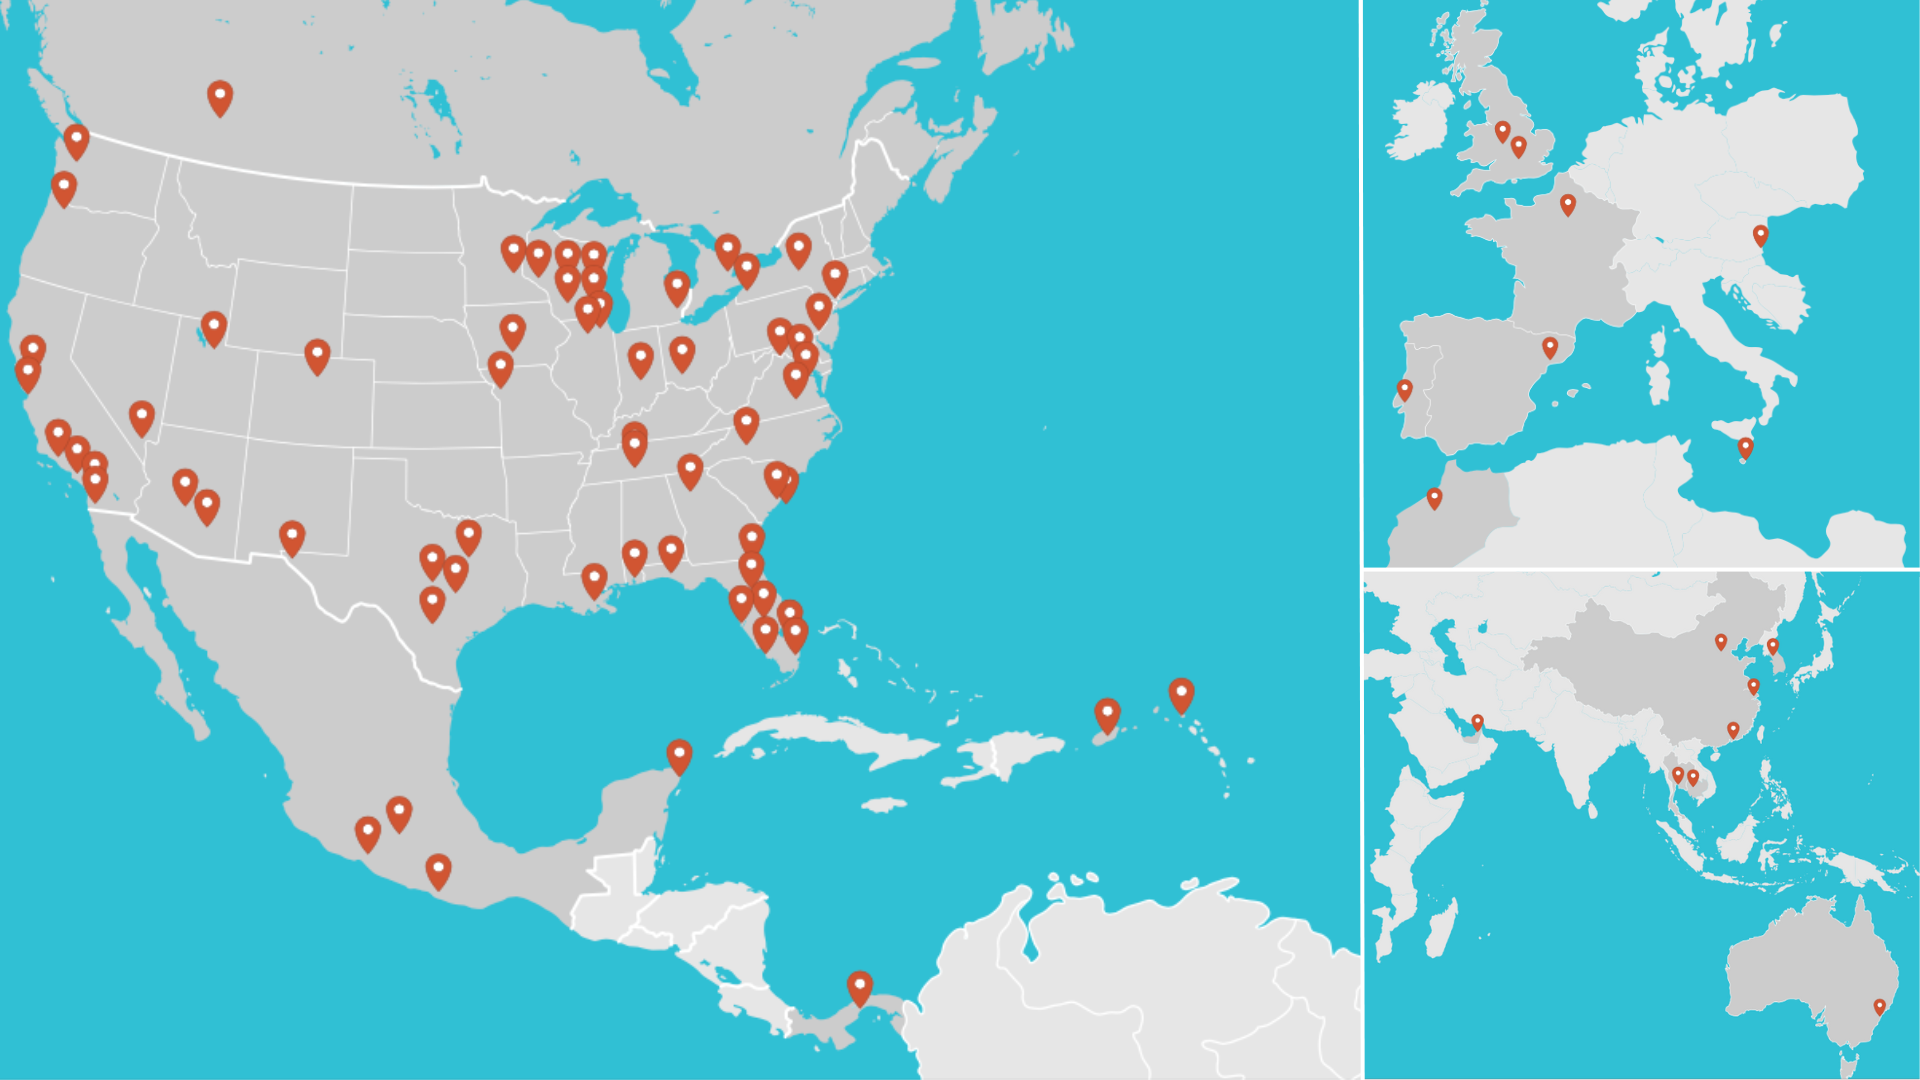 A global map with pinpoints where Tri-Marq has produced events. Some locations include Mexico, Canada, Spain, Australia, China, the UK, and more.